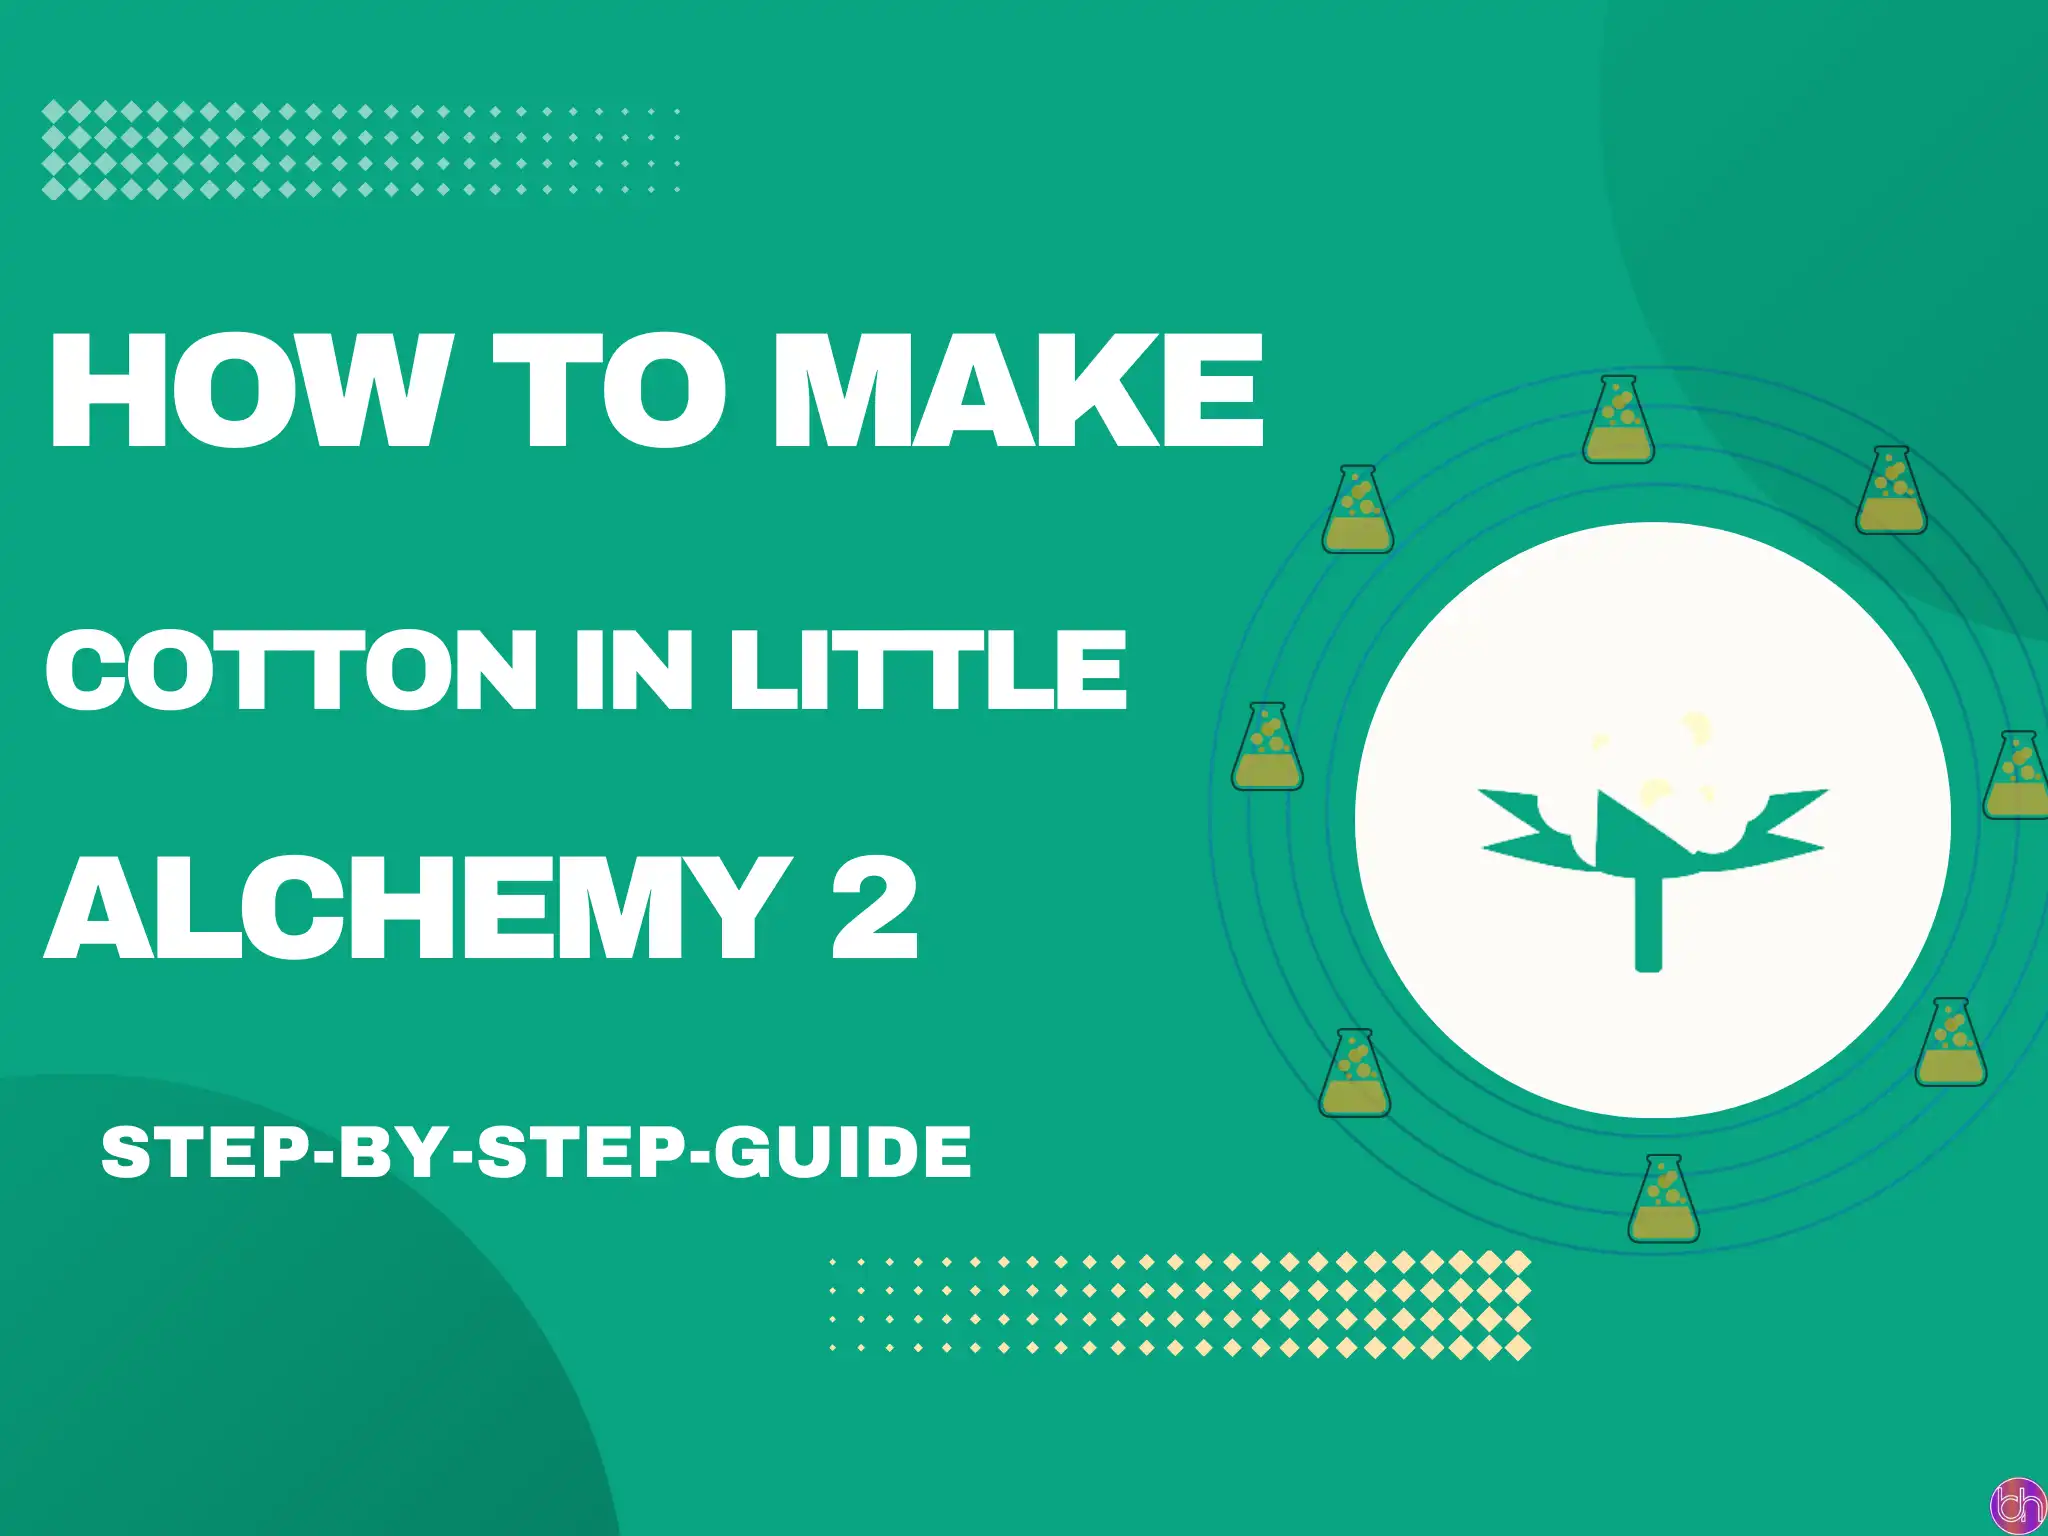 How to make Cotton in Little Alchemy 2